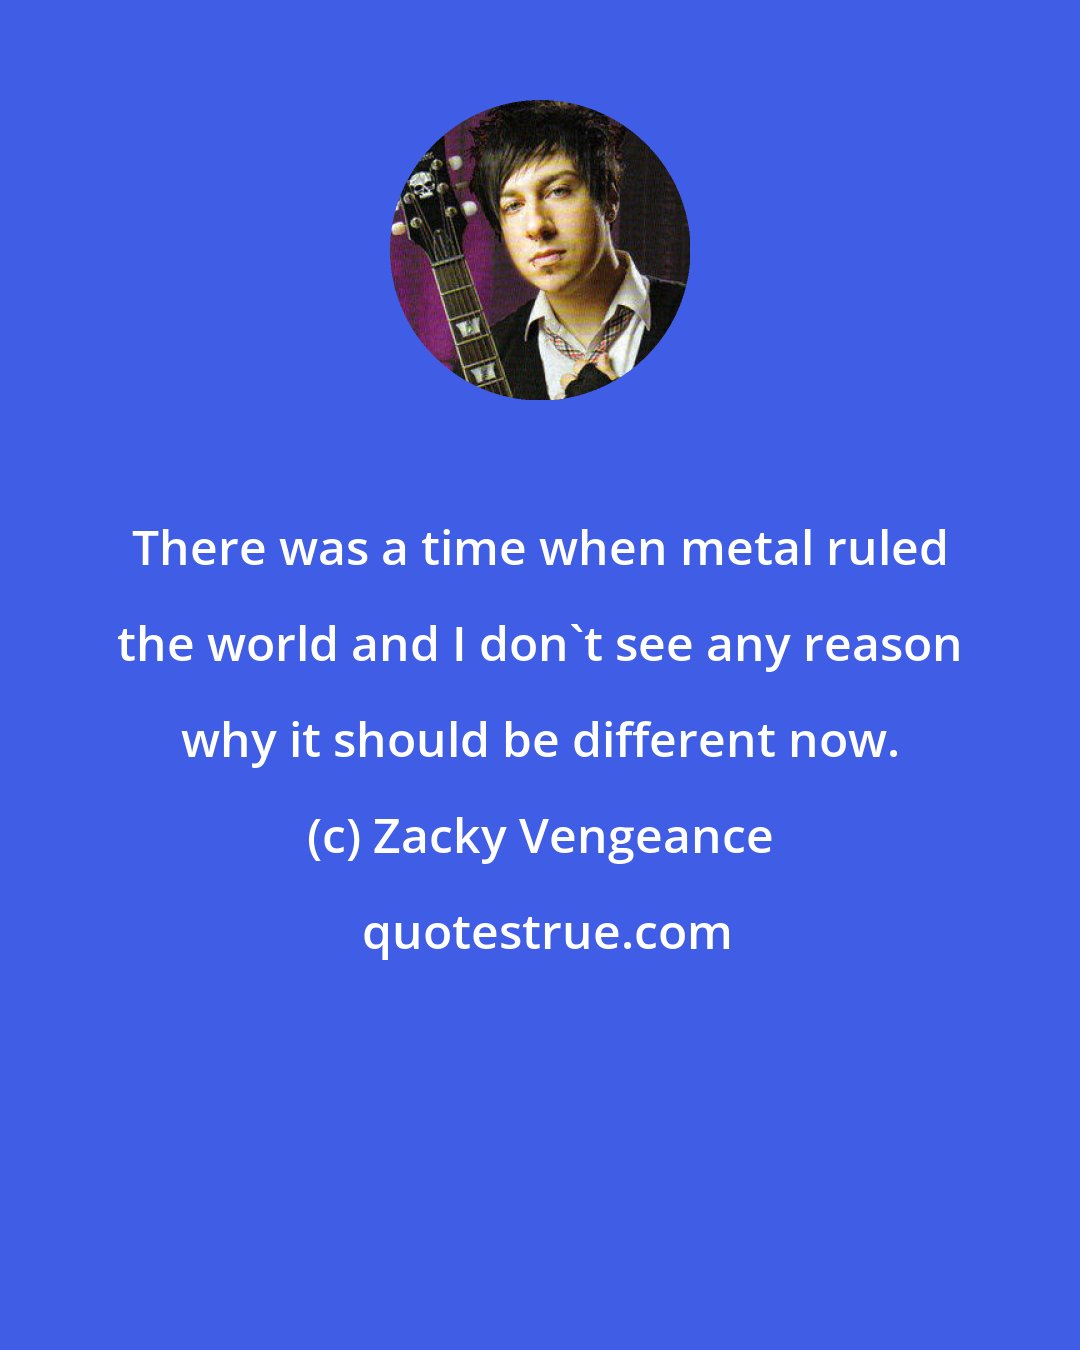 Zacky Vengeance: There was a time when metal ruled the world and I don't see any reason why it should be different now.